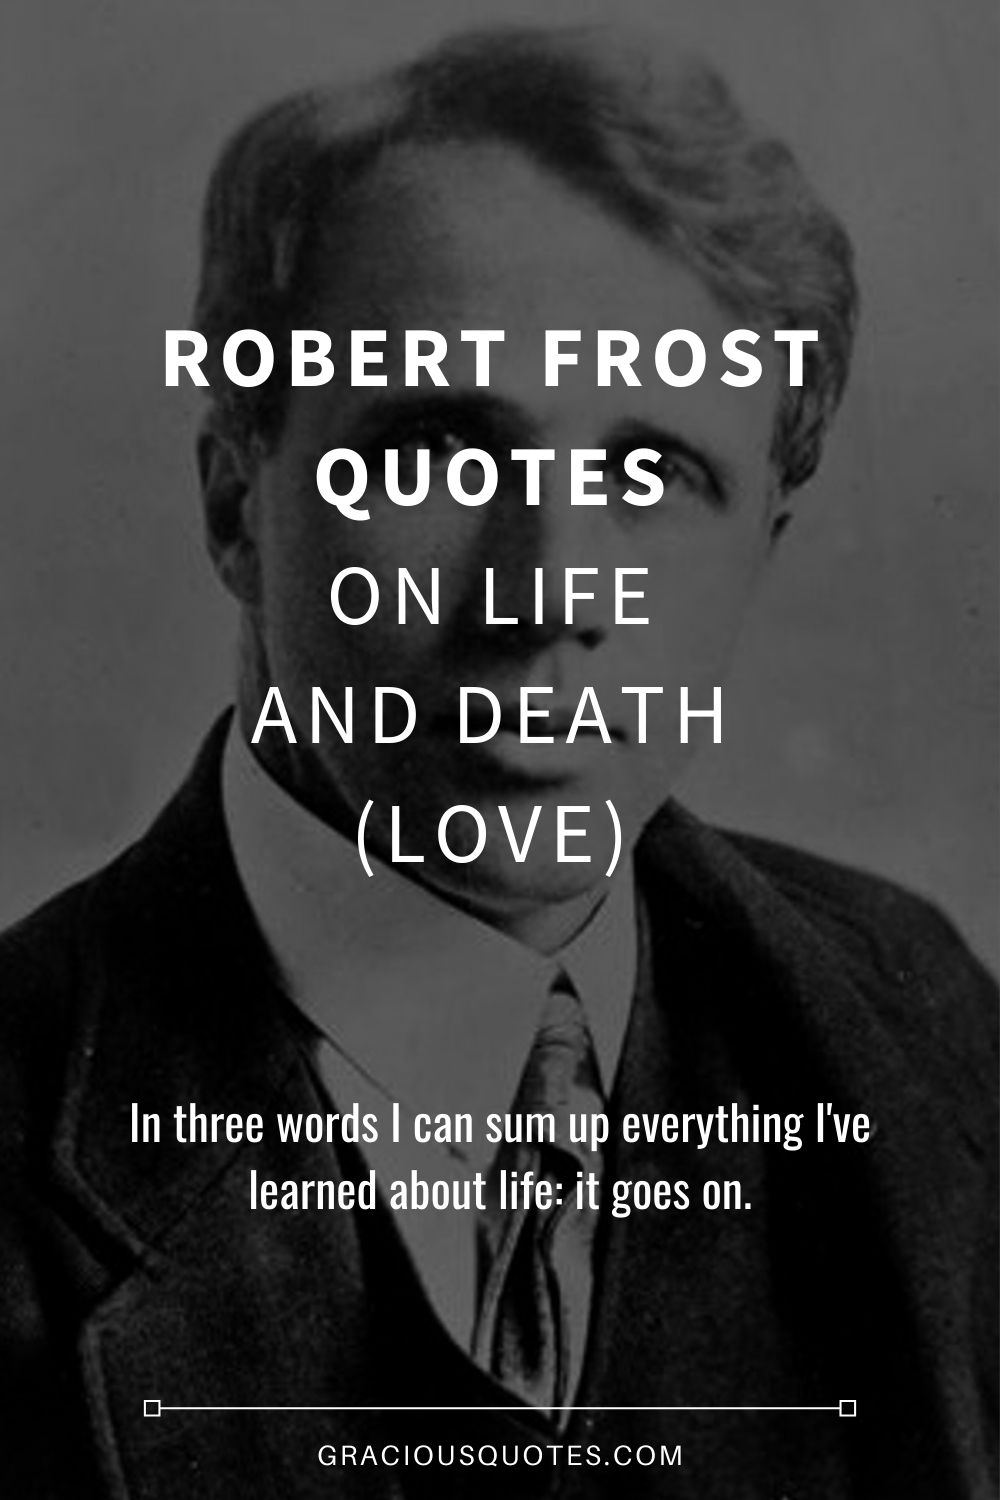 Robert Frost Quotes on Life and Death (LOVE) - Gracious Quotes